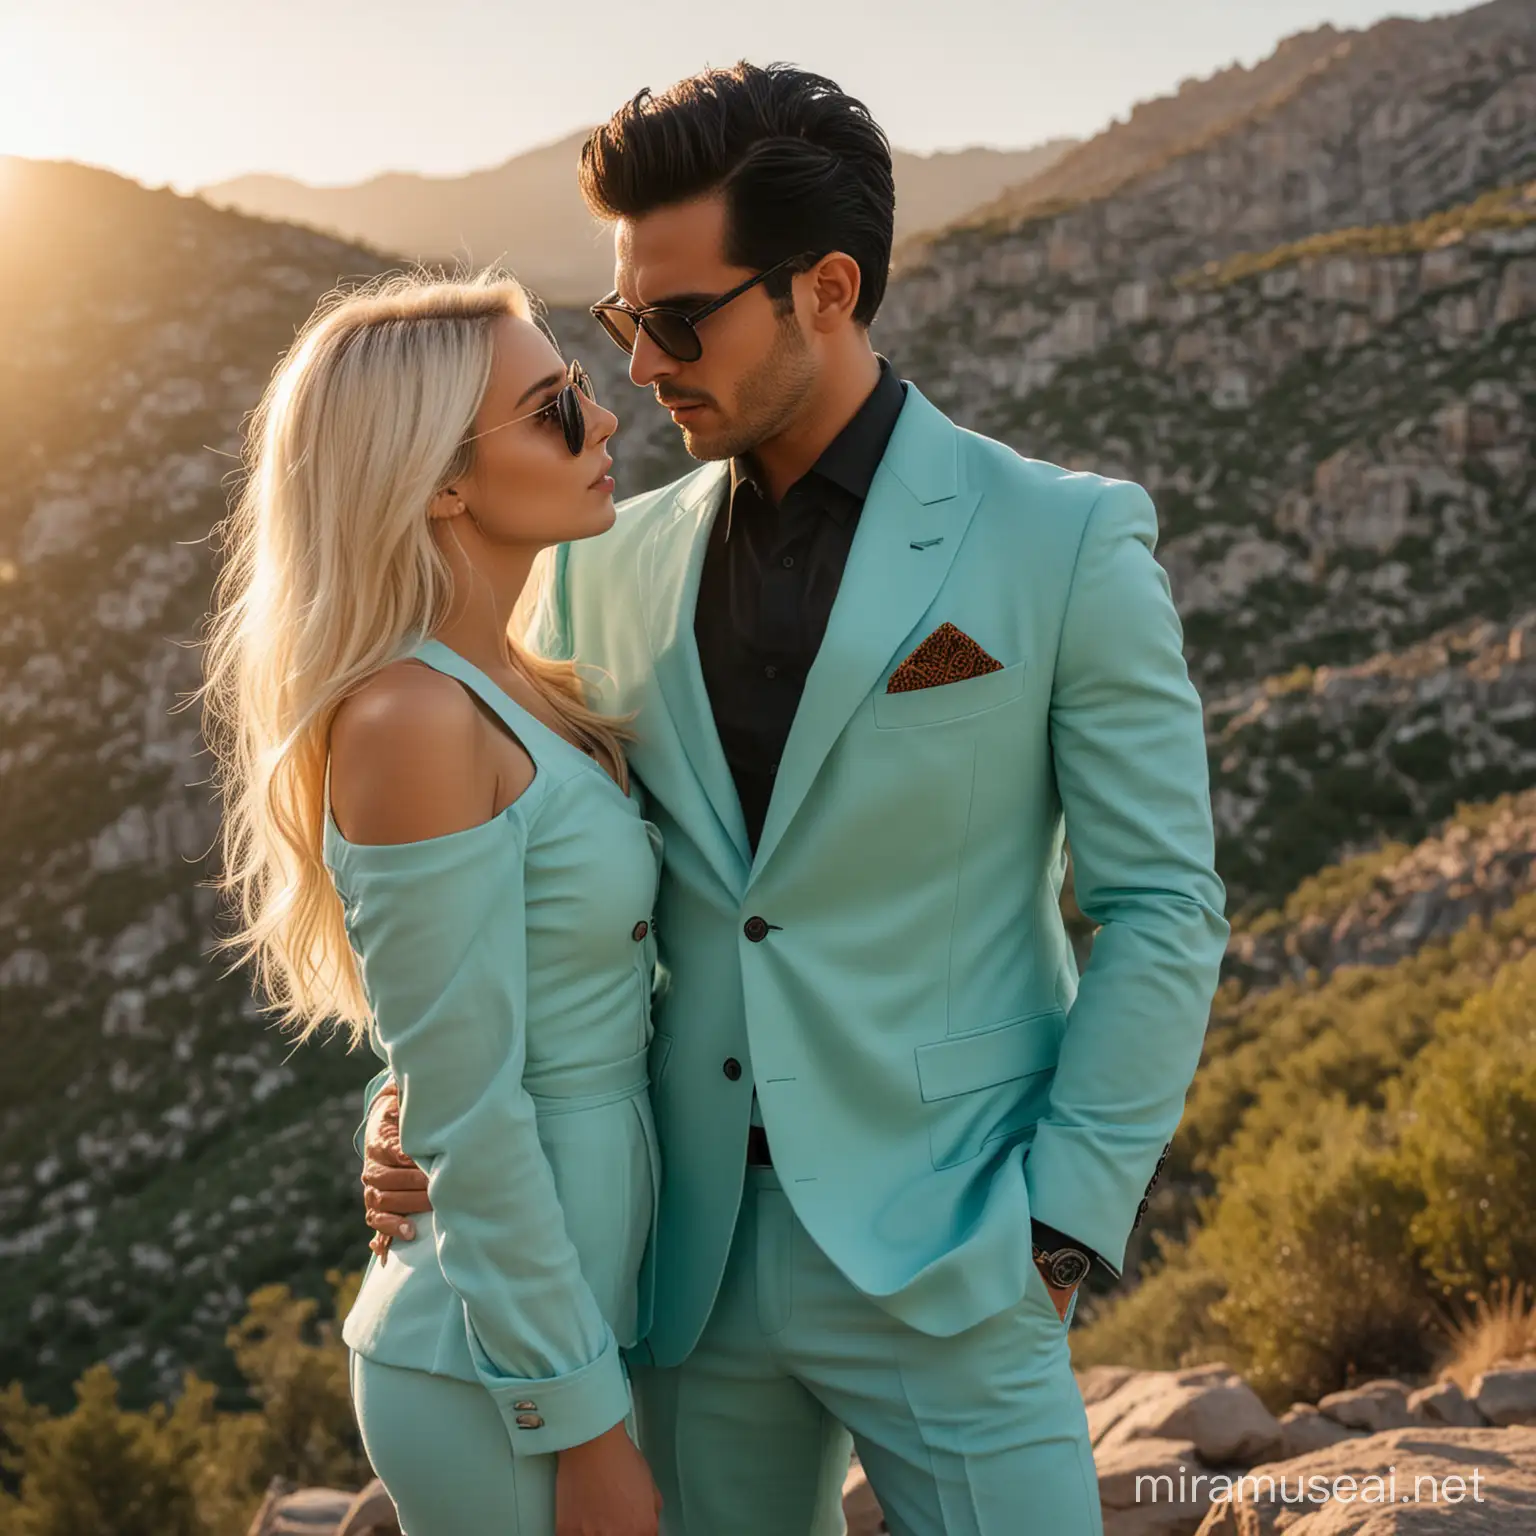 Elegant Man and Blonde Woman in Turquoise Suit at Mountain Sunset